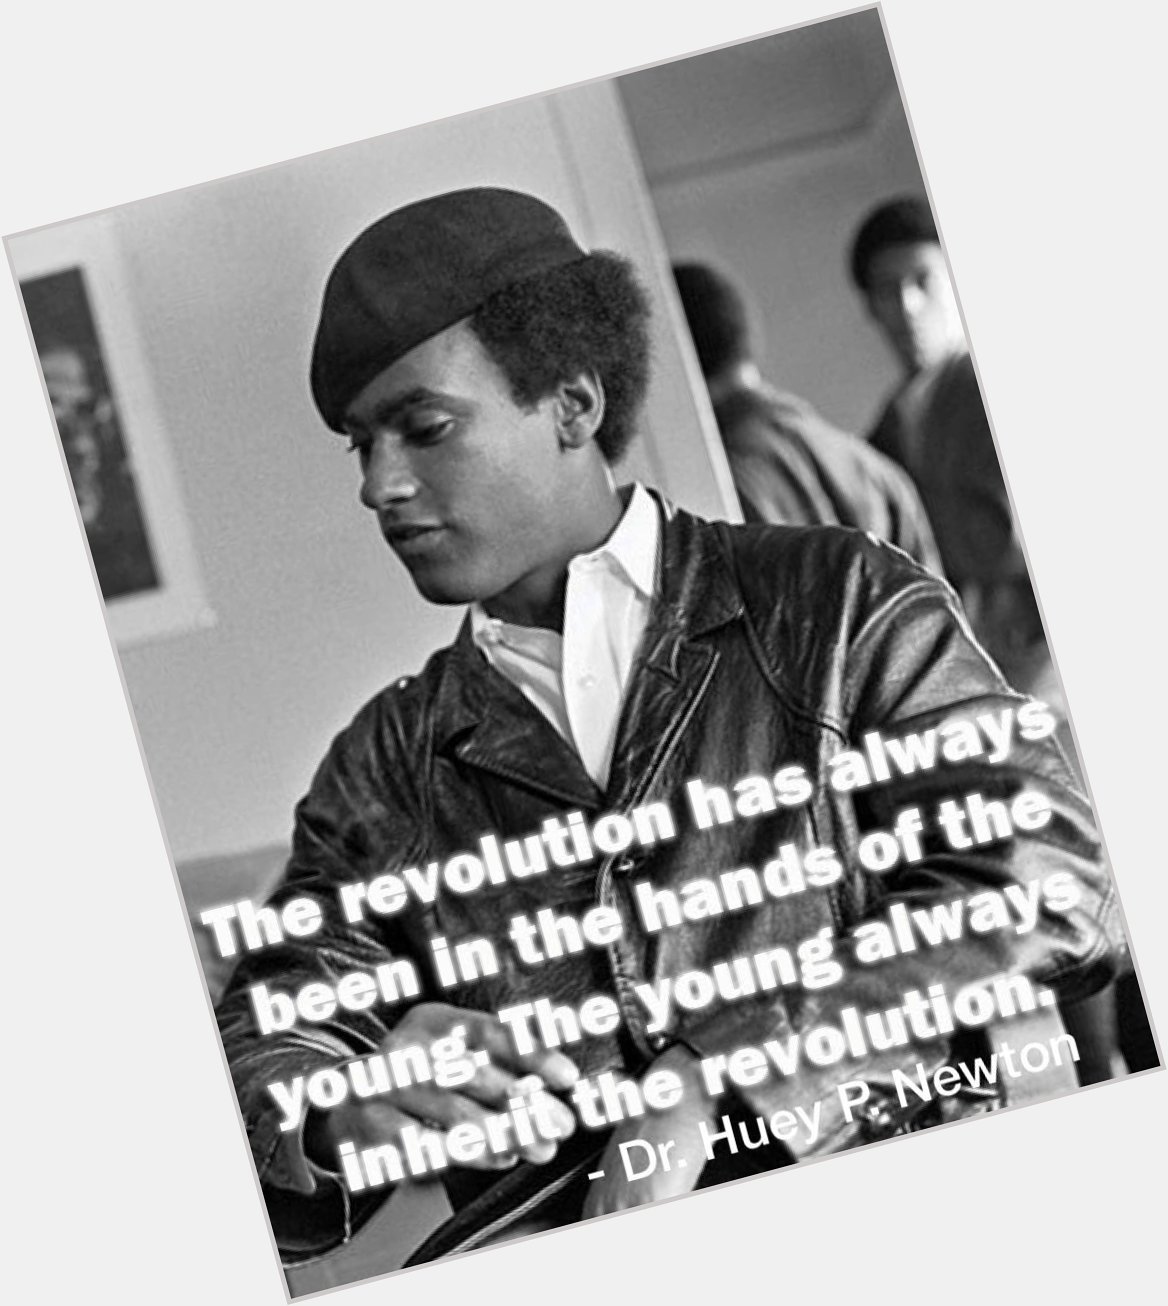 Happy Birthday to the OG the honorable DR. HUEY P. NEWTON, co-founder of the Black Panther Party. 